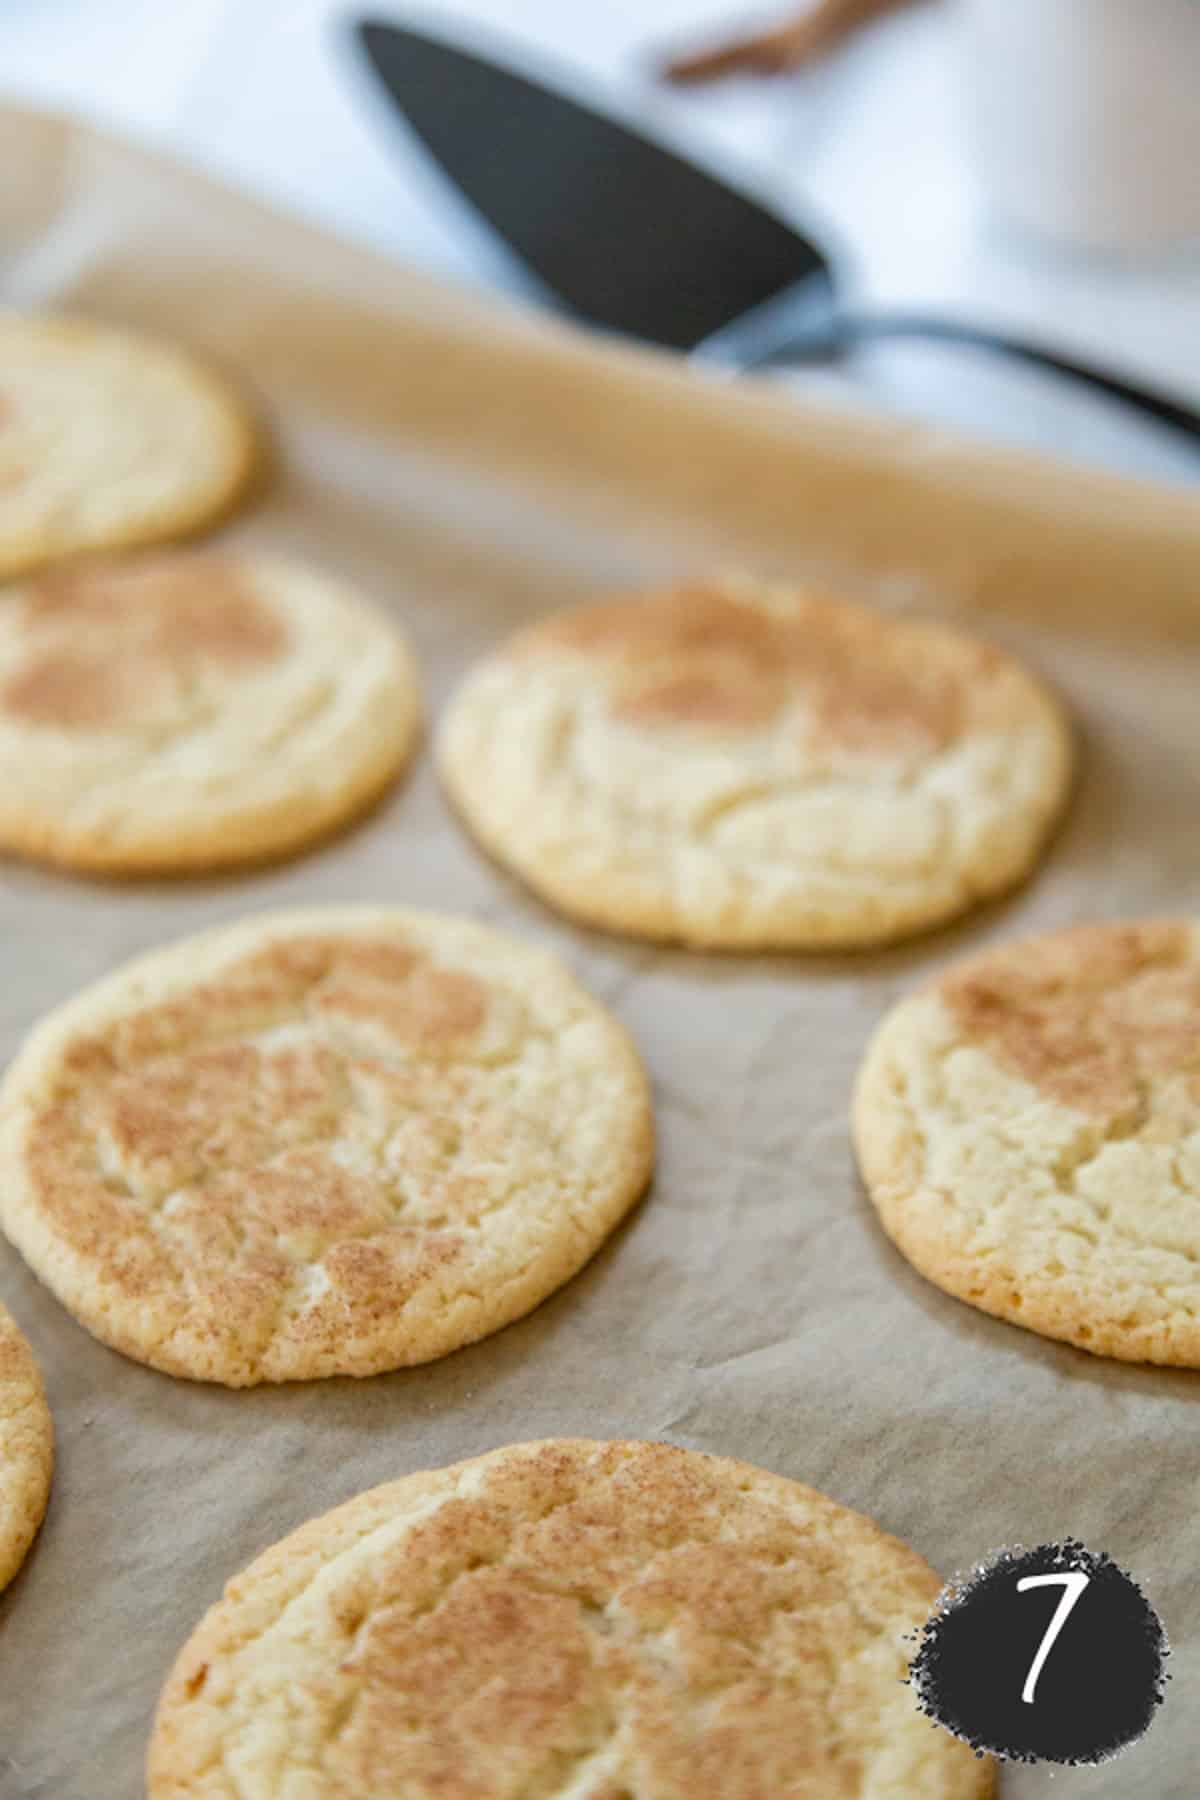 Baked snickerdoodles on a baking sheet.